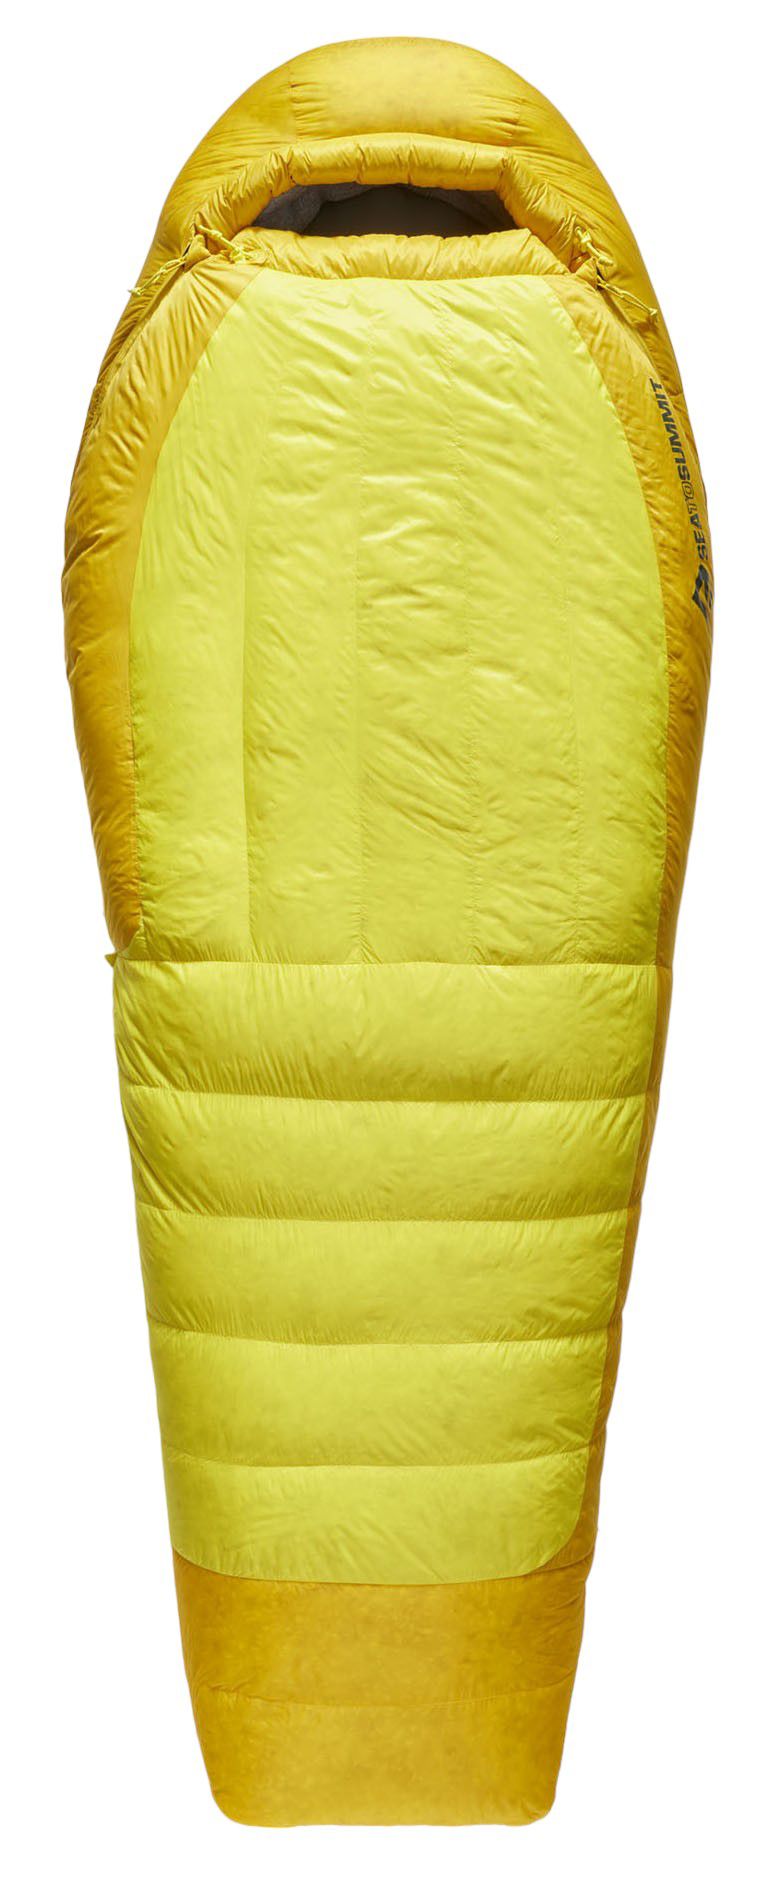 Photos - Suitcase / Backpack Cover Sea To Summit Alpine Down Winter Sleeping Bag, Men's, Blazing Yellow 23S2S 